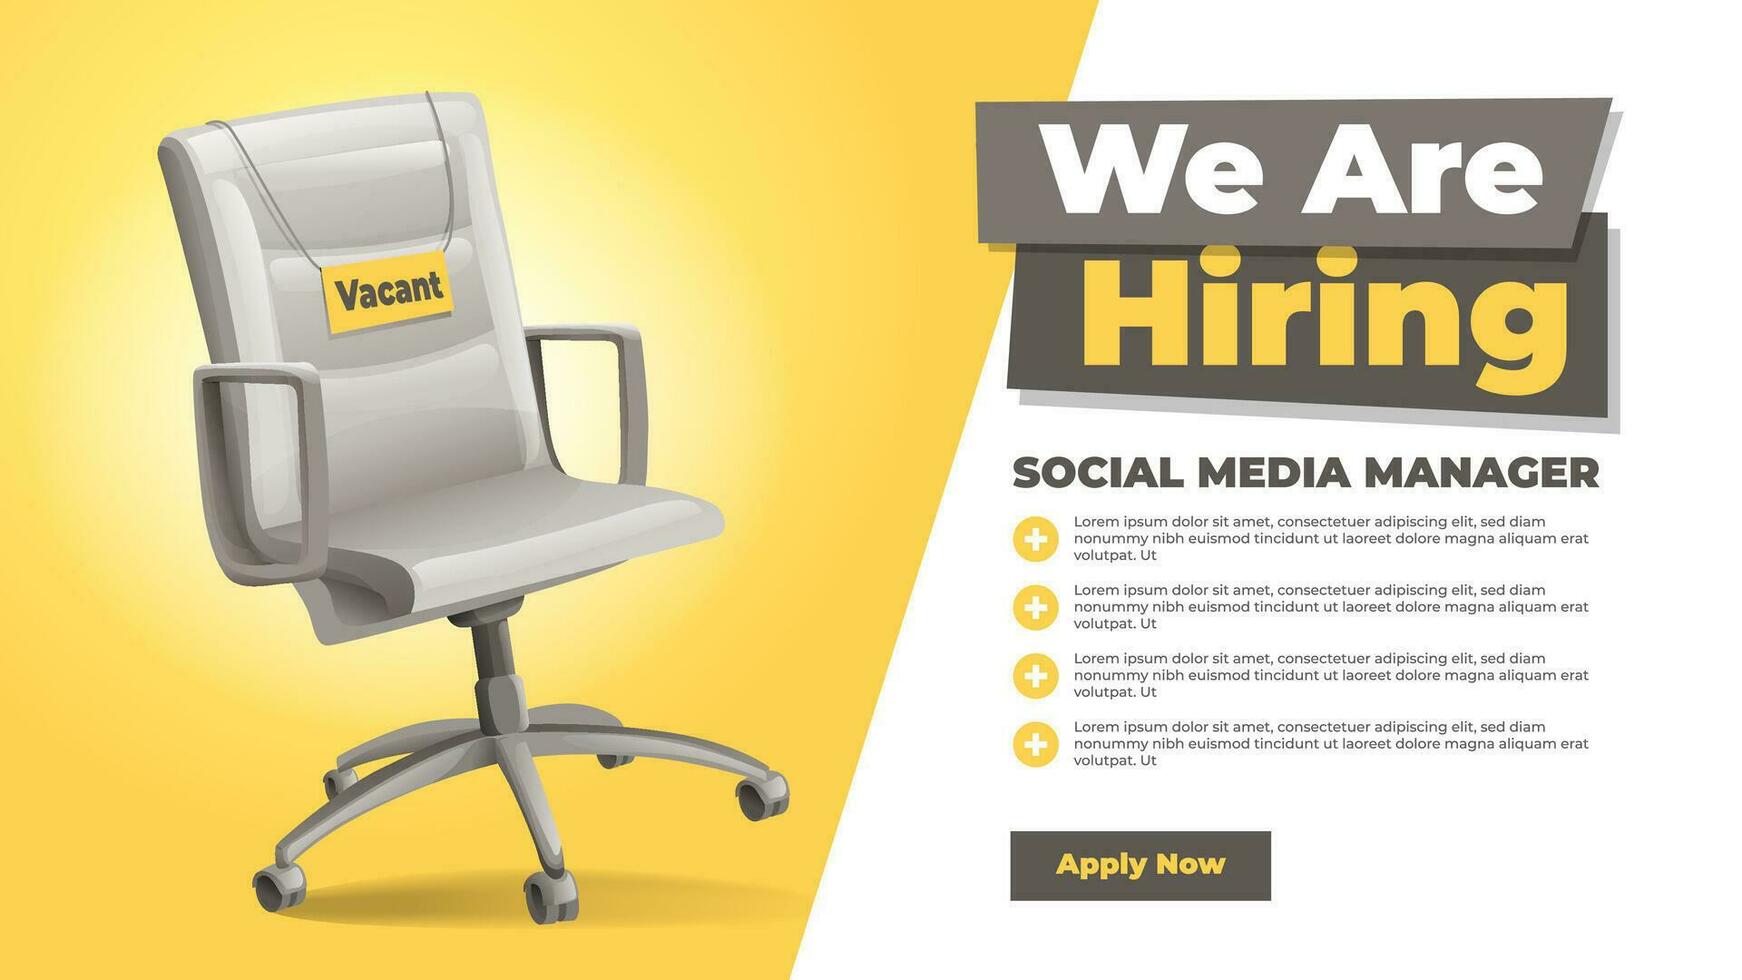 We Are Hiring Job Vacancy Banner With Empty Office Chair Illustration vector